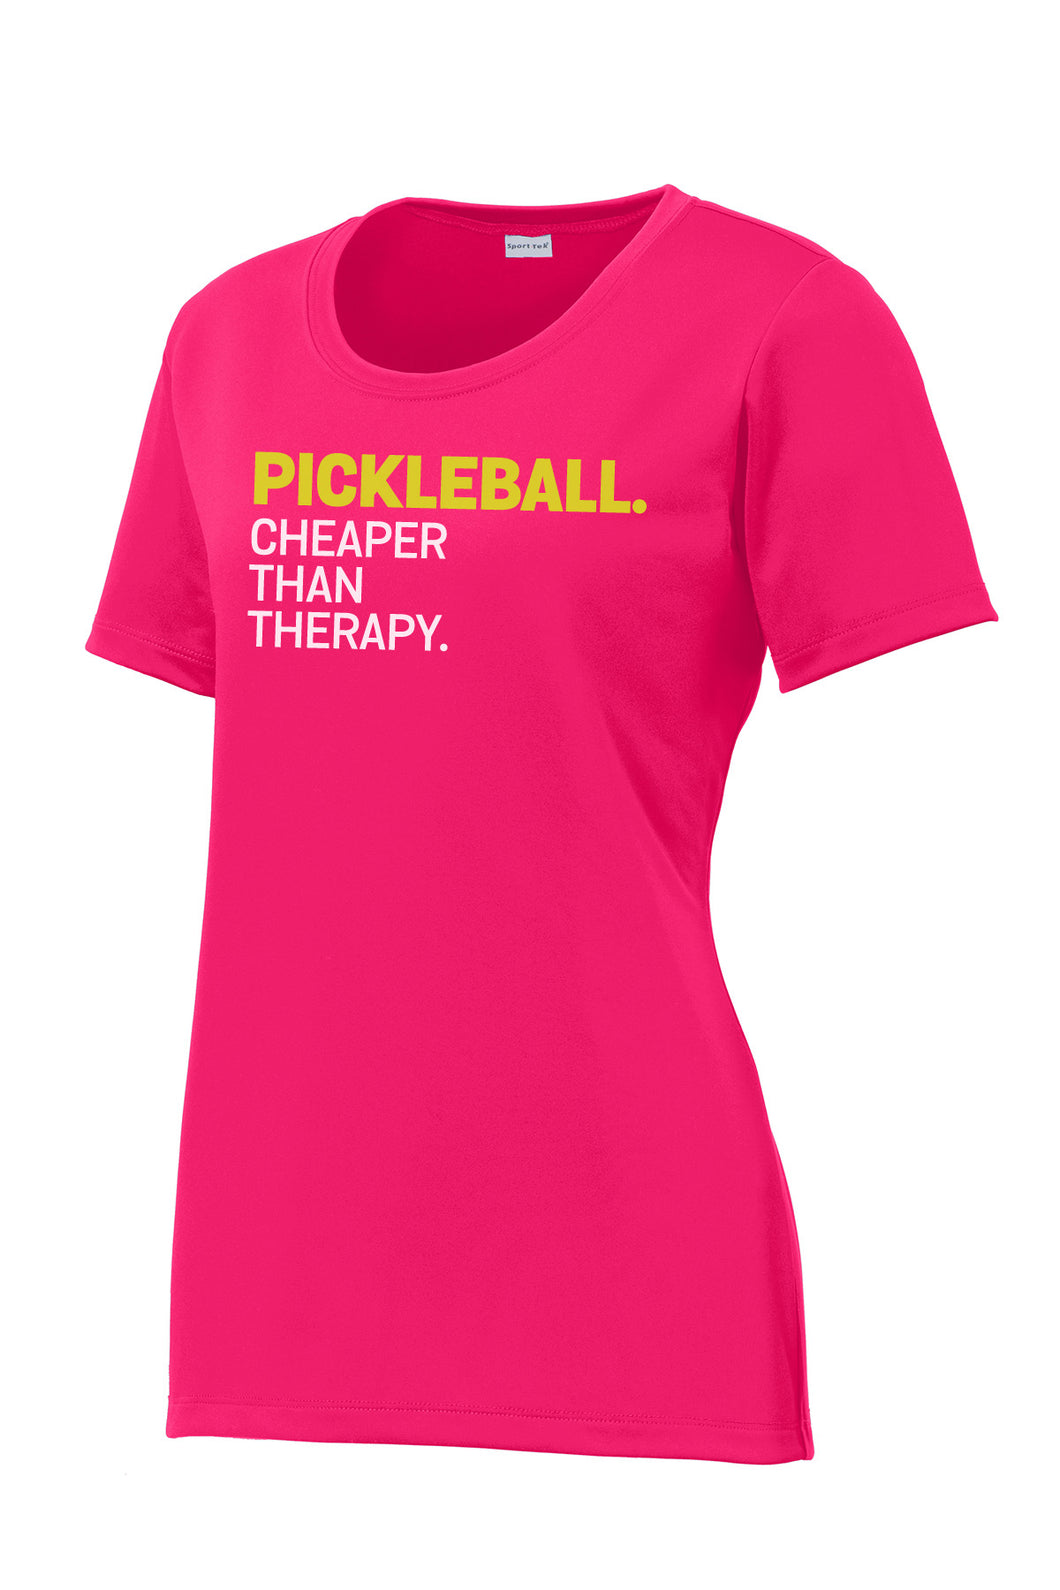 Pickleball. Cheaper Than Therapy. Womens Performance Tee